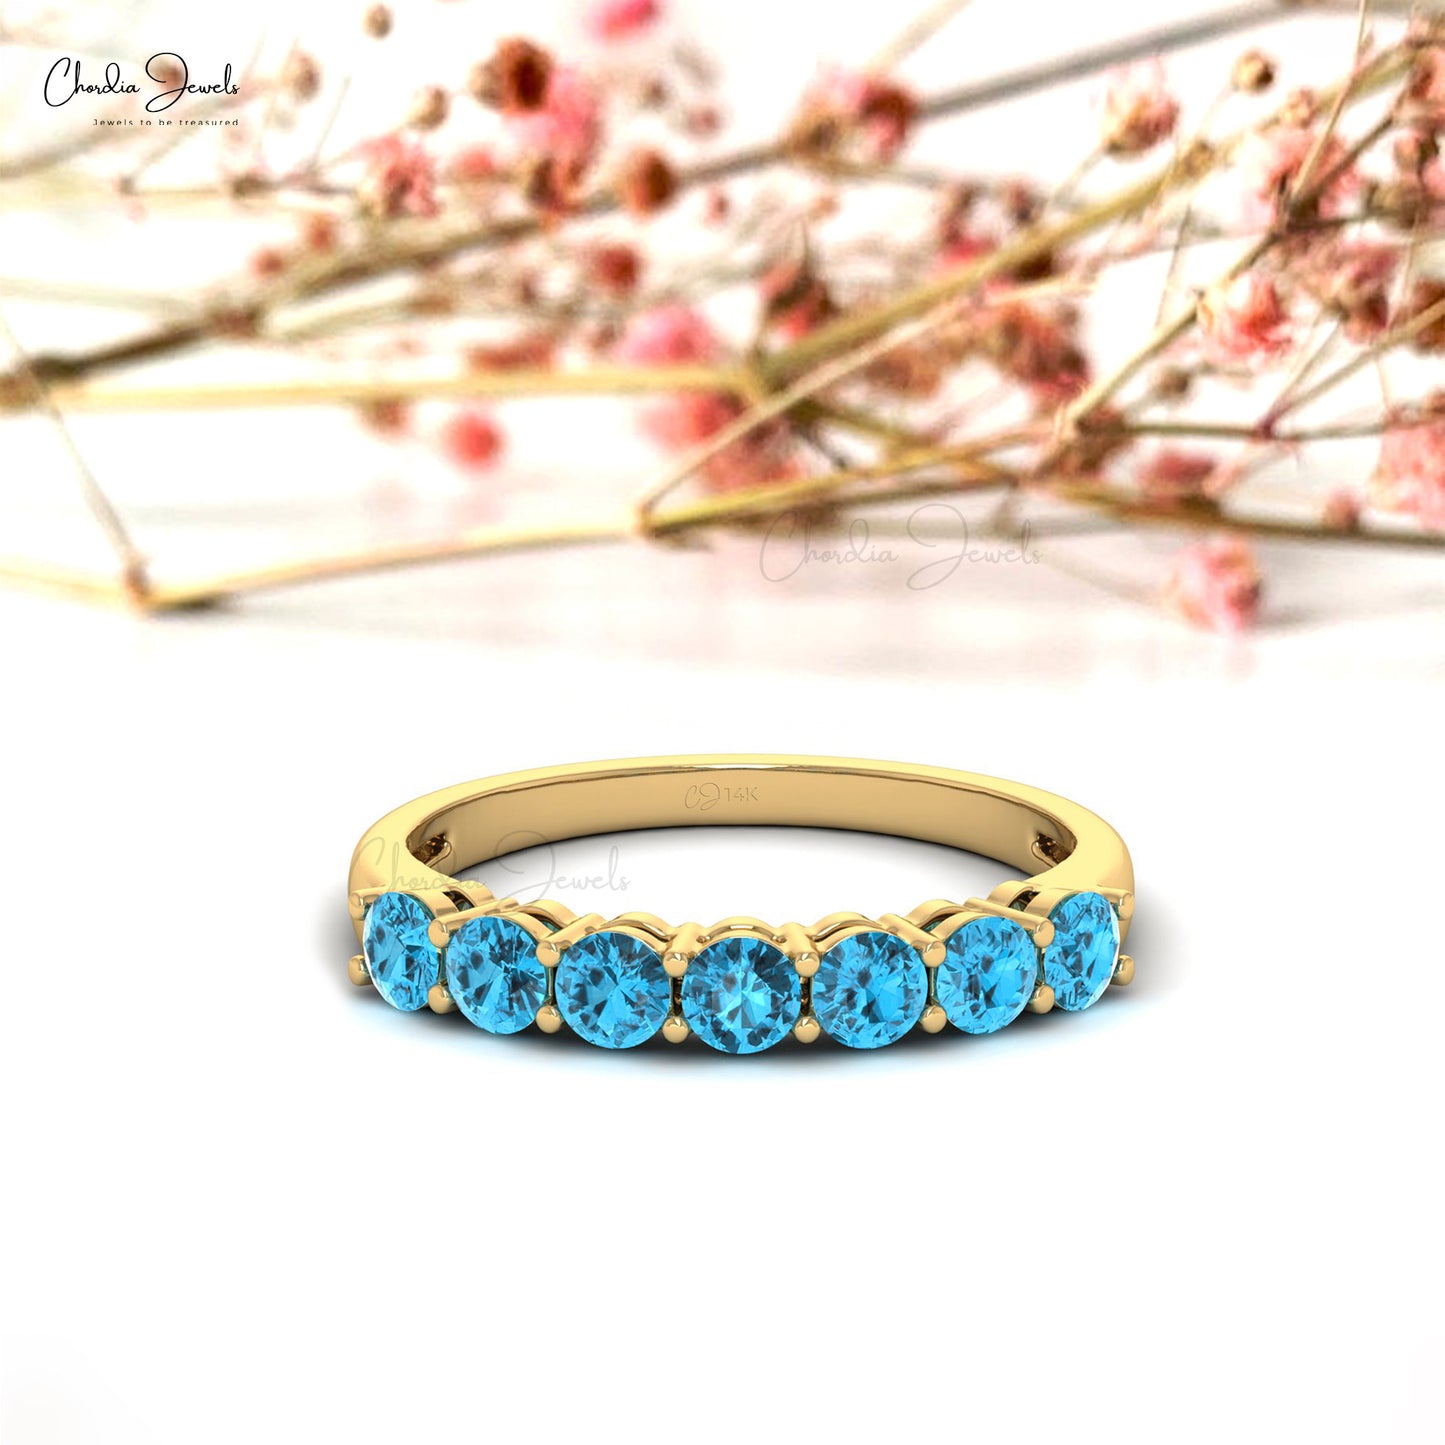 Load image into Gallery viewer, December Birtstone Natural Swiss Blue Topaz Half Eternity Band in 14k Solid Gold, 3mm Round Gemstone Band Ring For Wedding Gift
